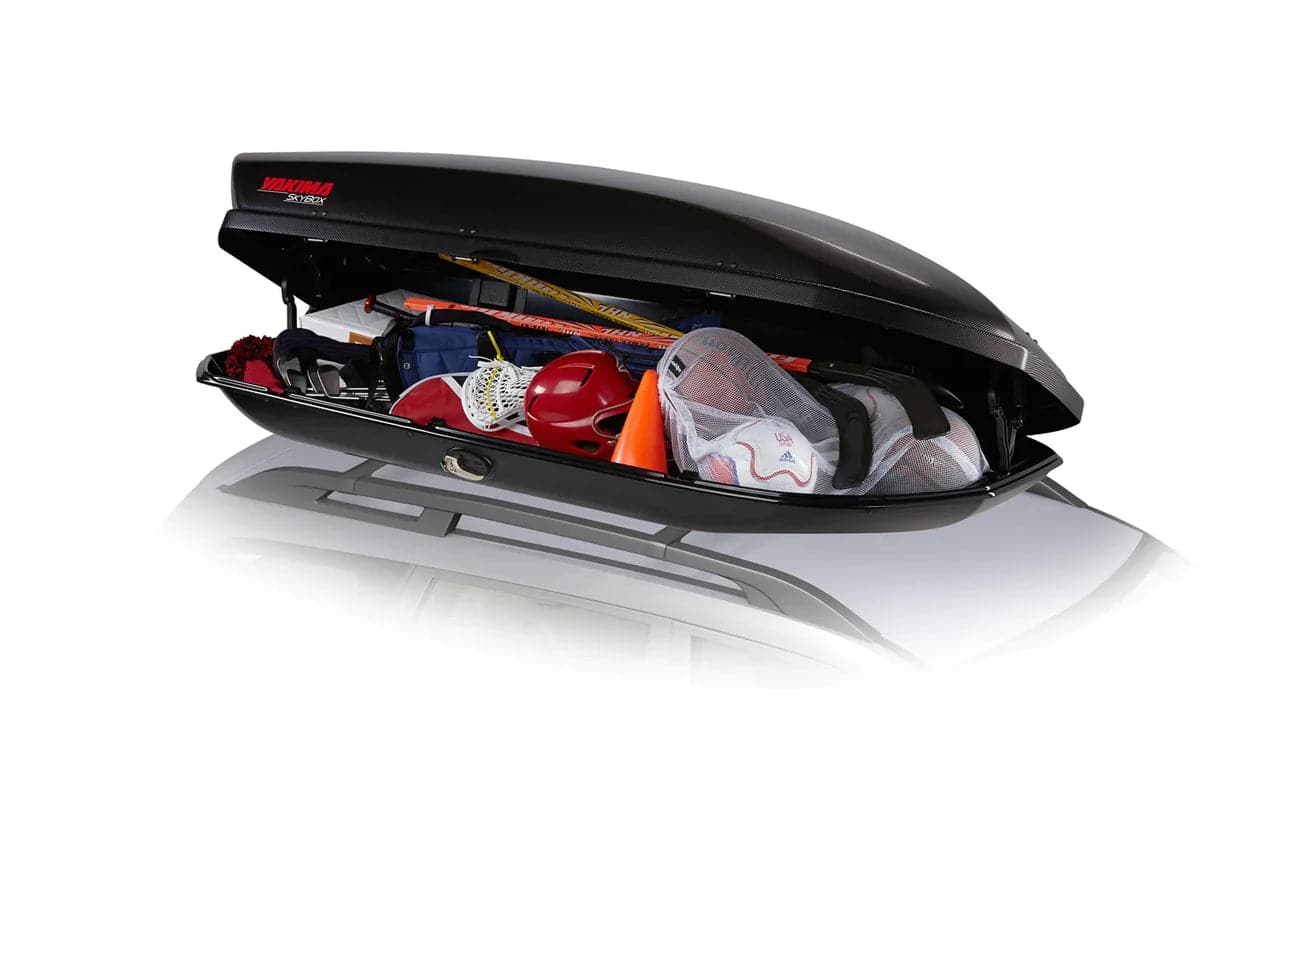 Featuring the Skybox 18 Carbonite cargo box, storage manufactured by Yakima shown here from a third angle.